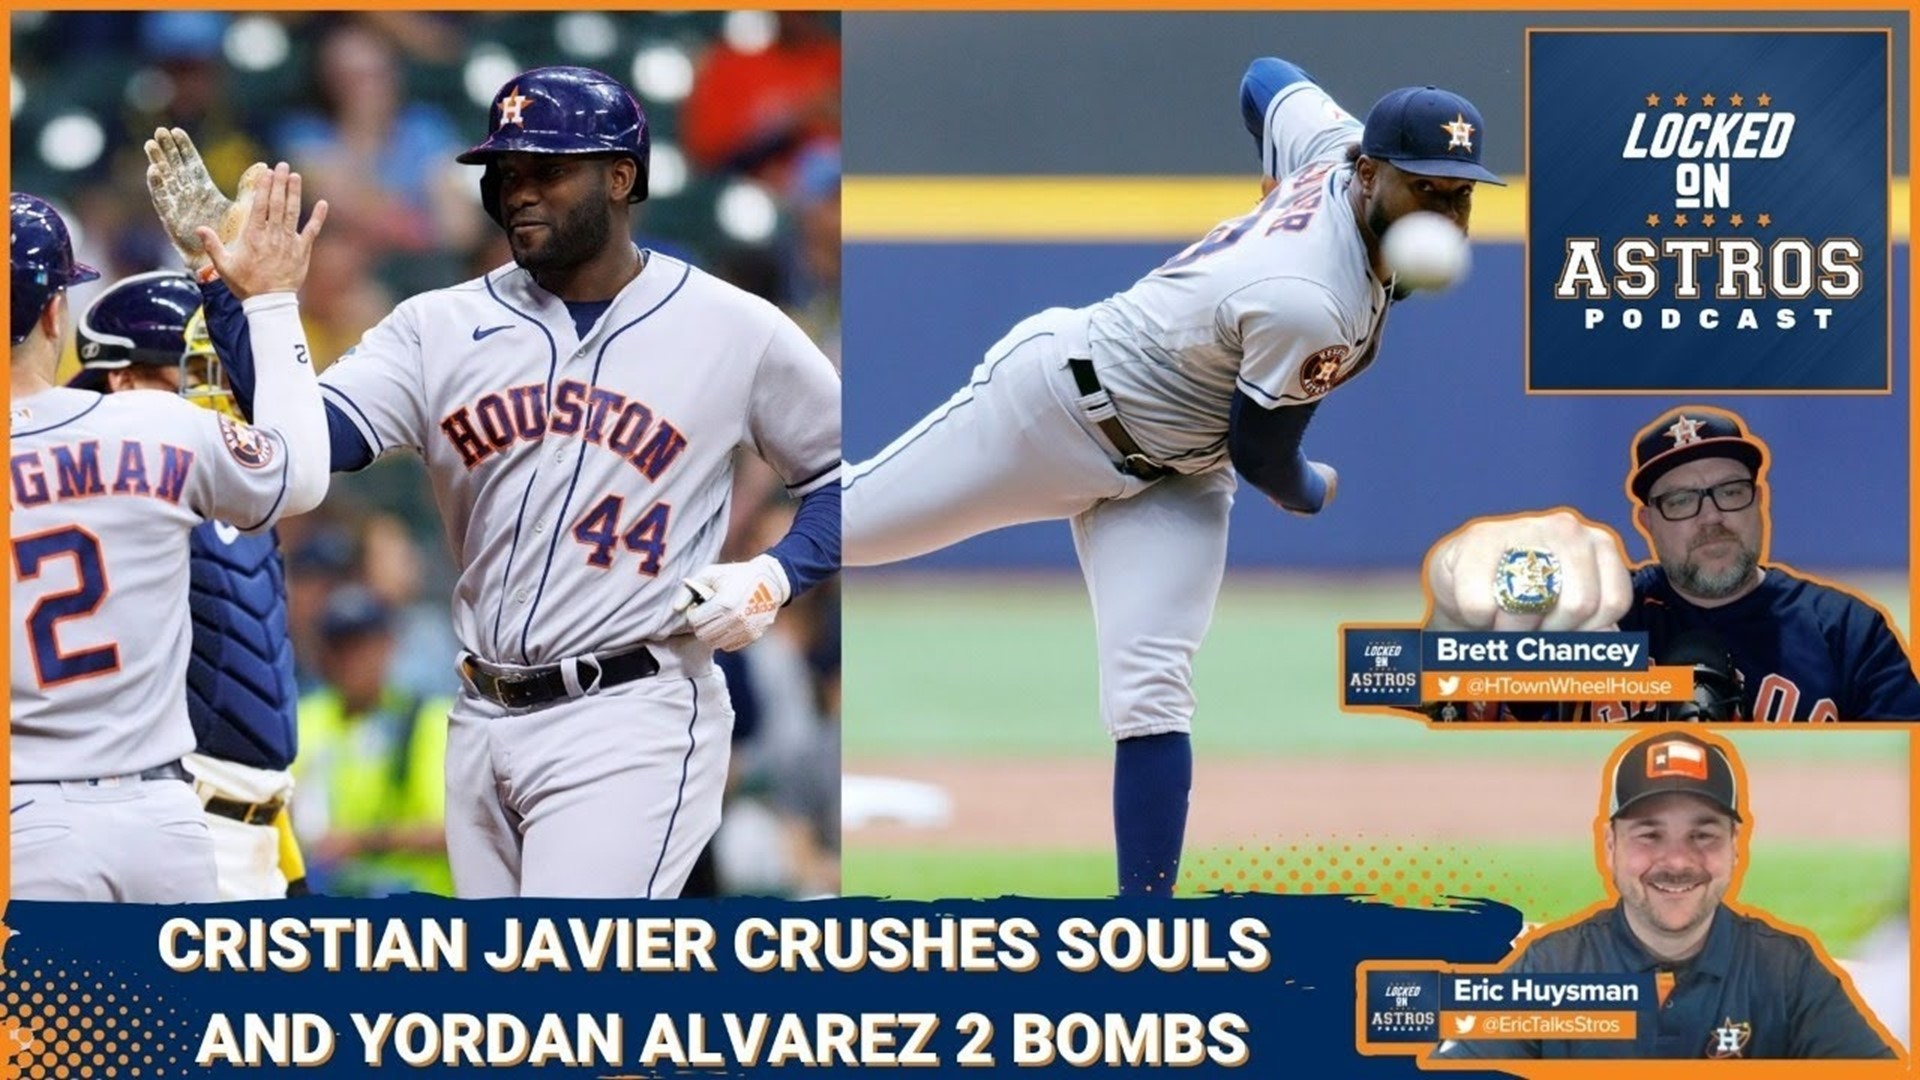 The Astros slug 5 homers in support of Cristian Javier